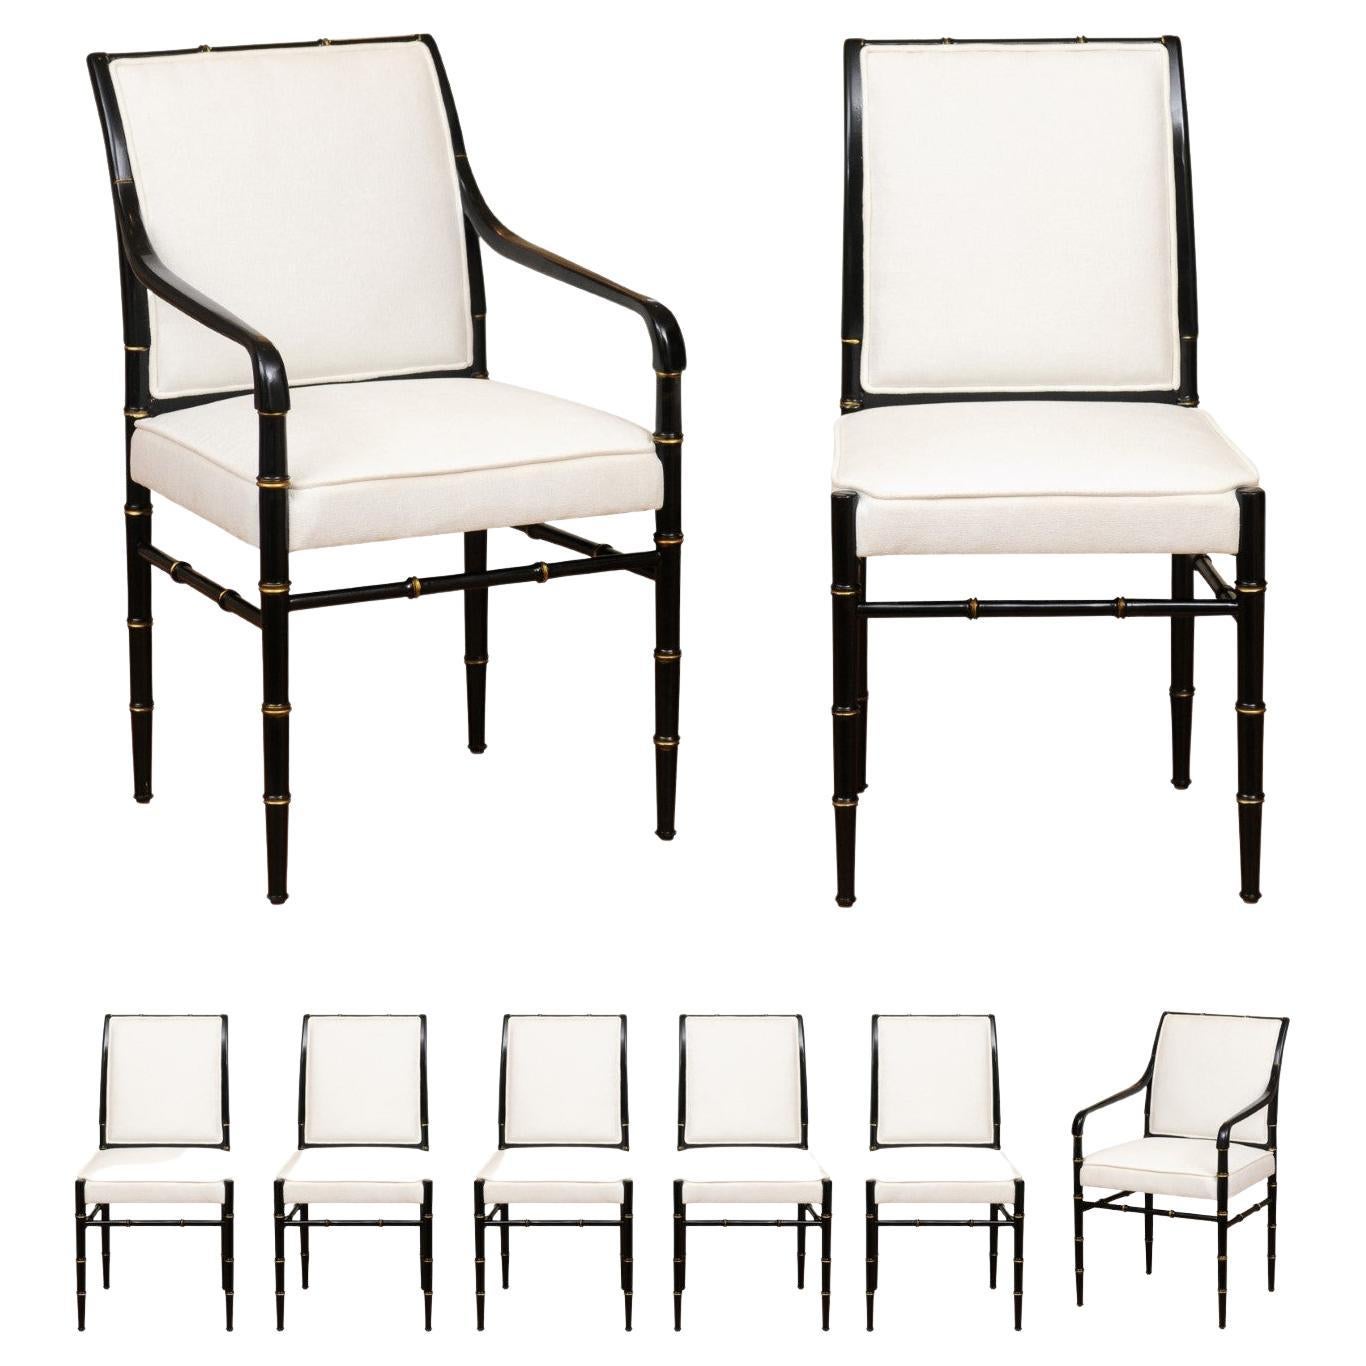 Elegant Set of 8 High Back Faux Bamboo Dining Chairs in Black Lacquer